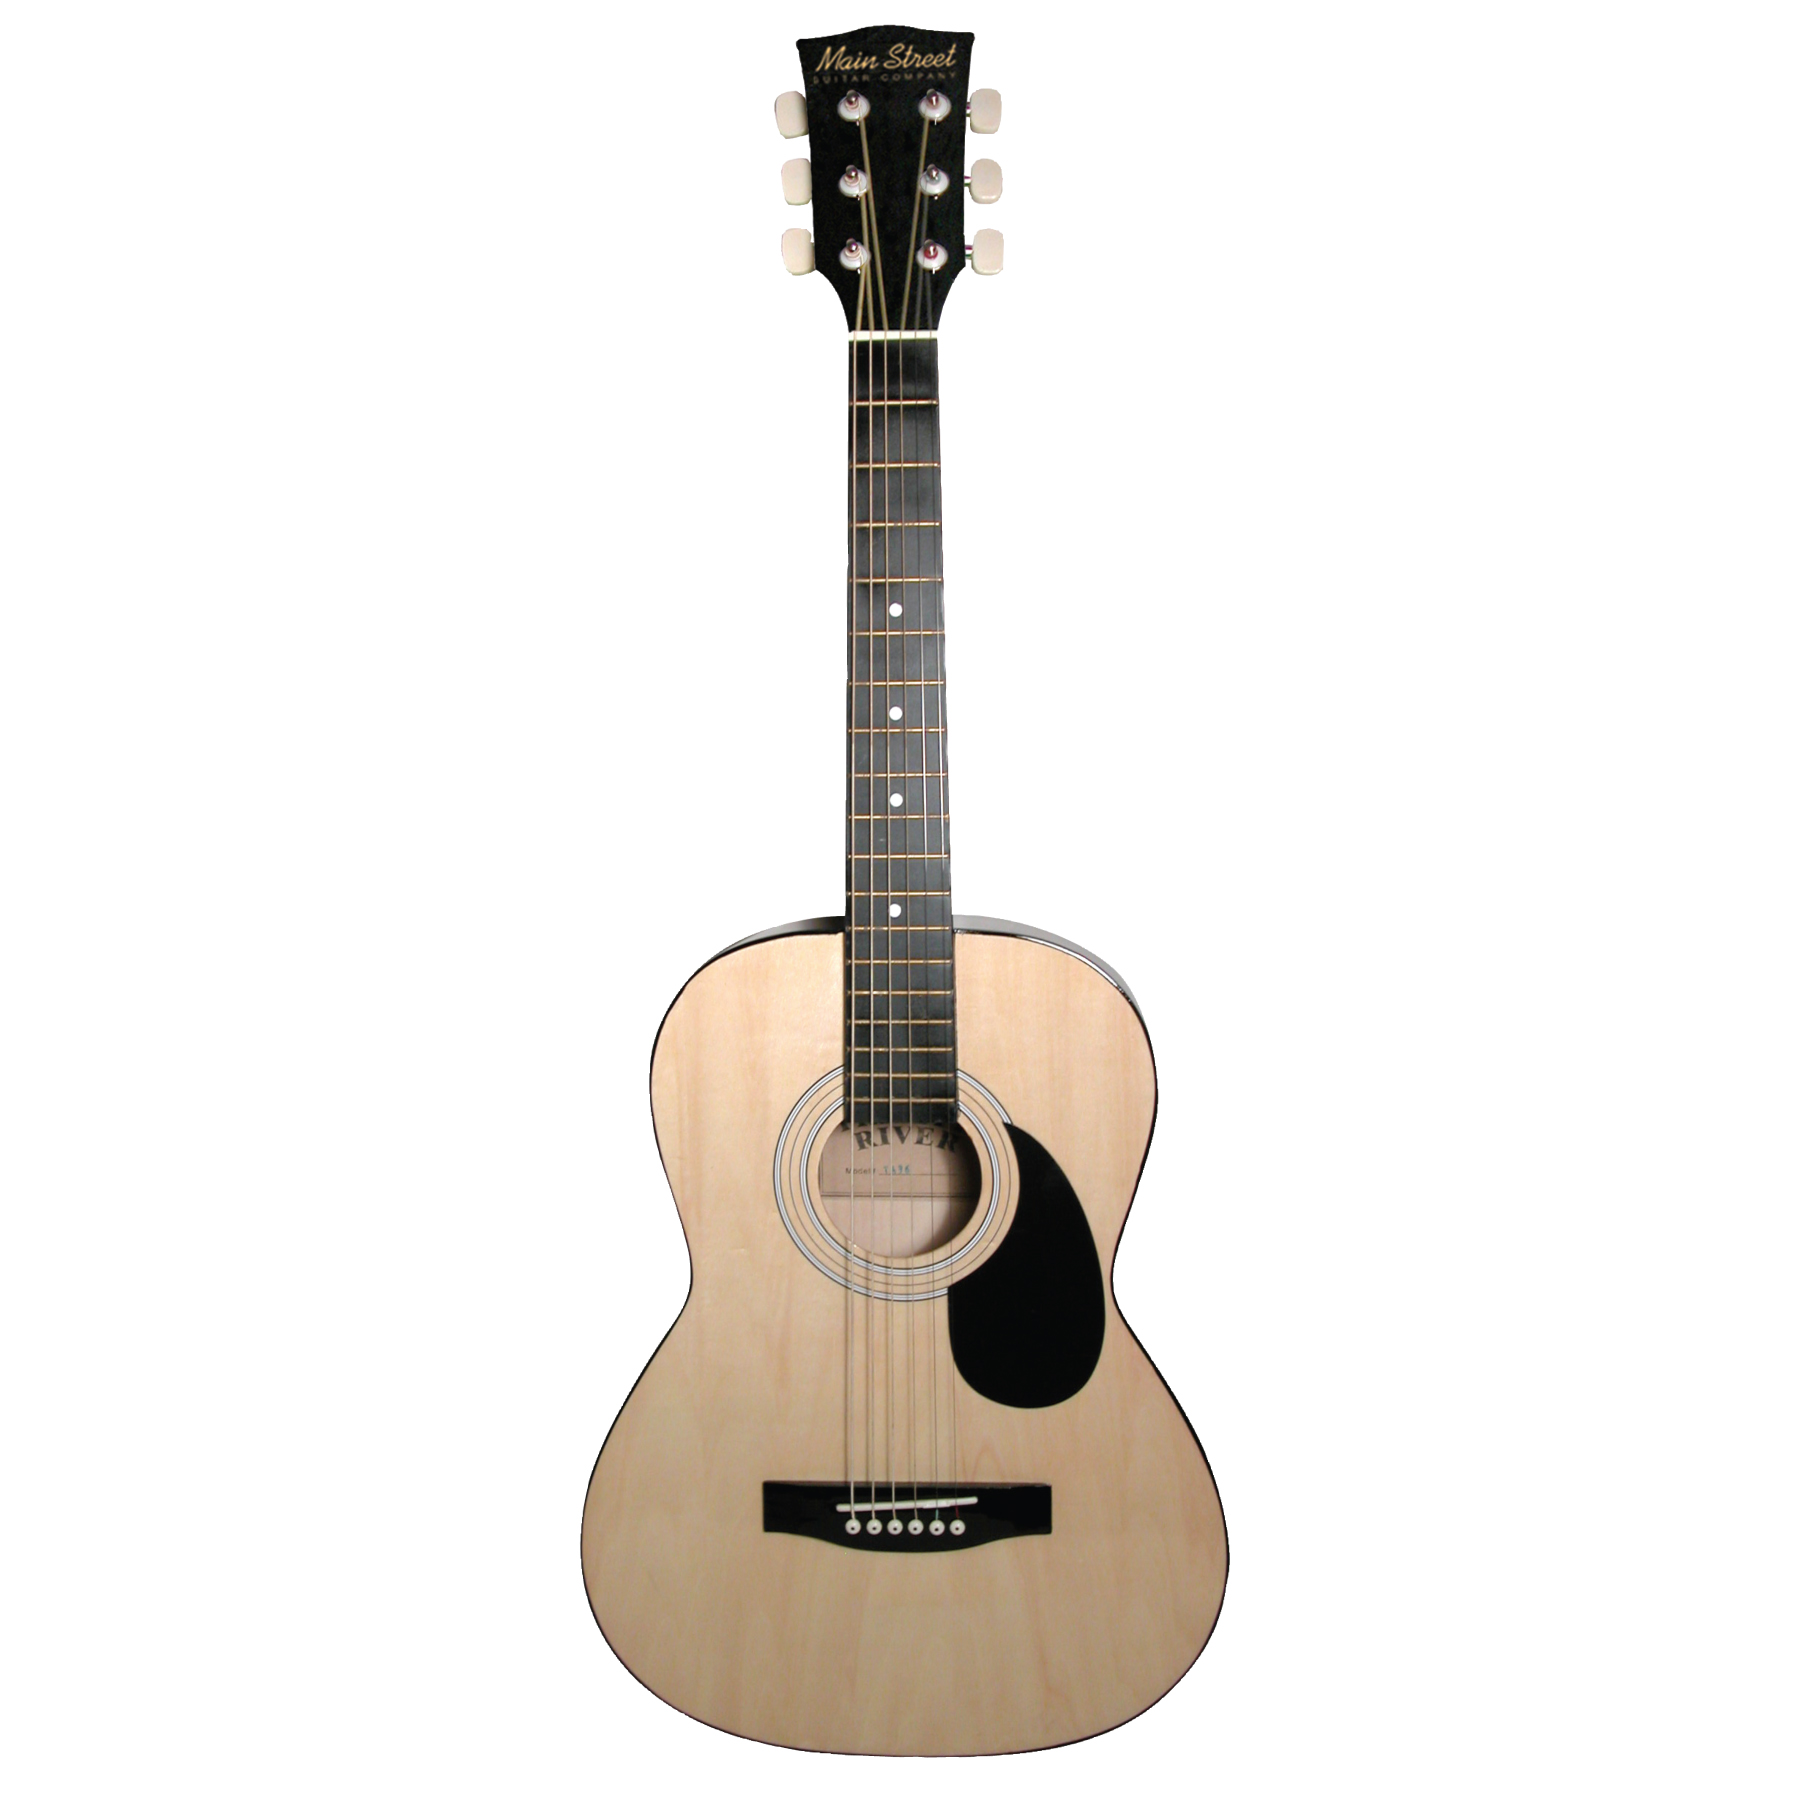 Main Street Standard Size 36-Inch Acoustic Guitar